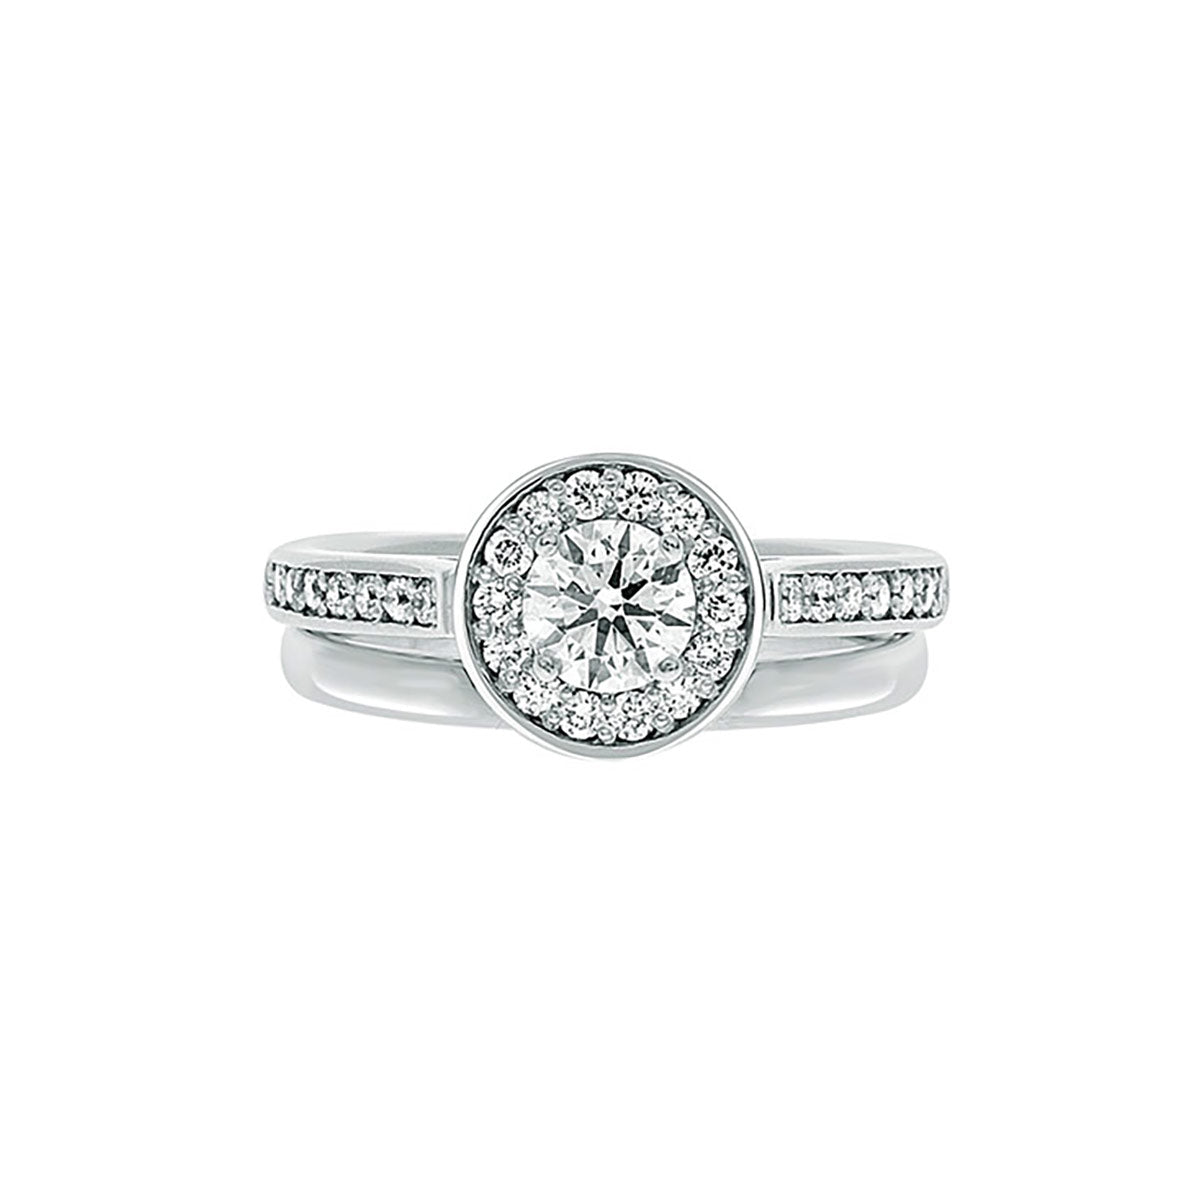 Round Halo Engagement Ring in white gold with a matching plain wedding band